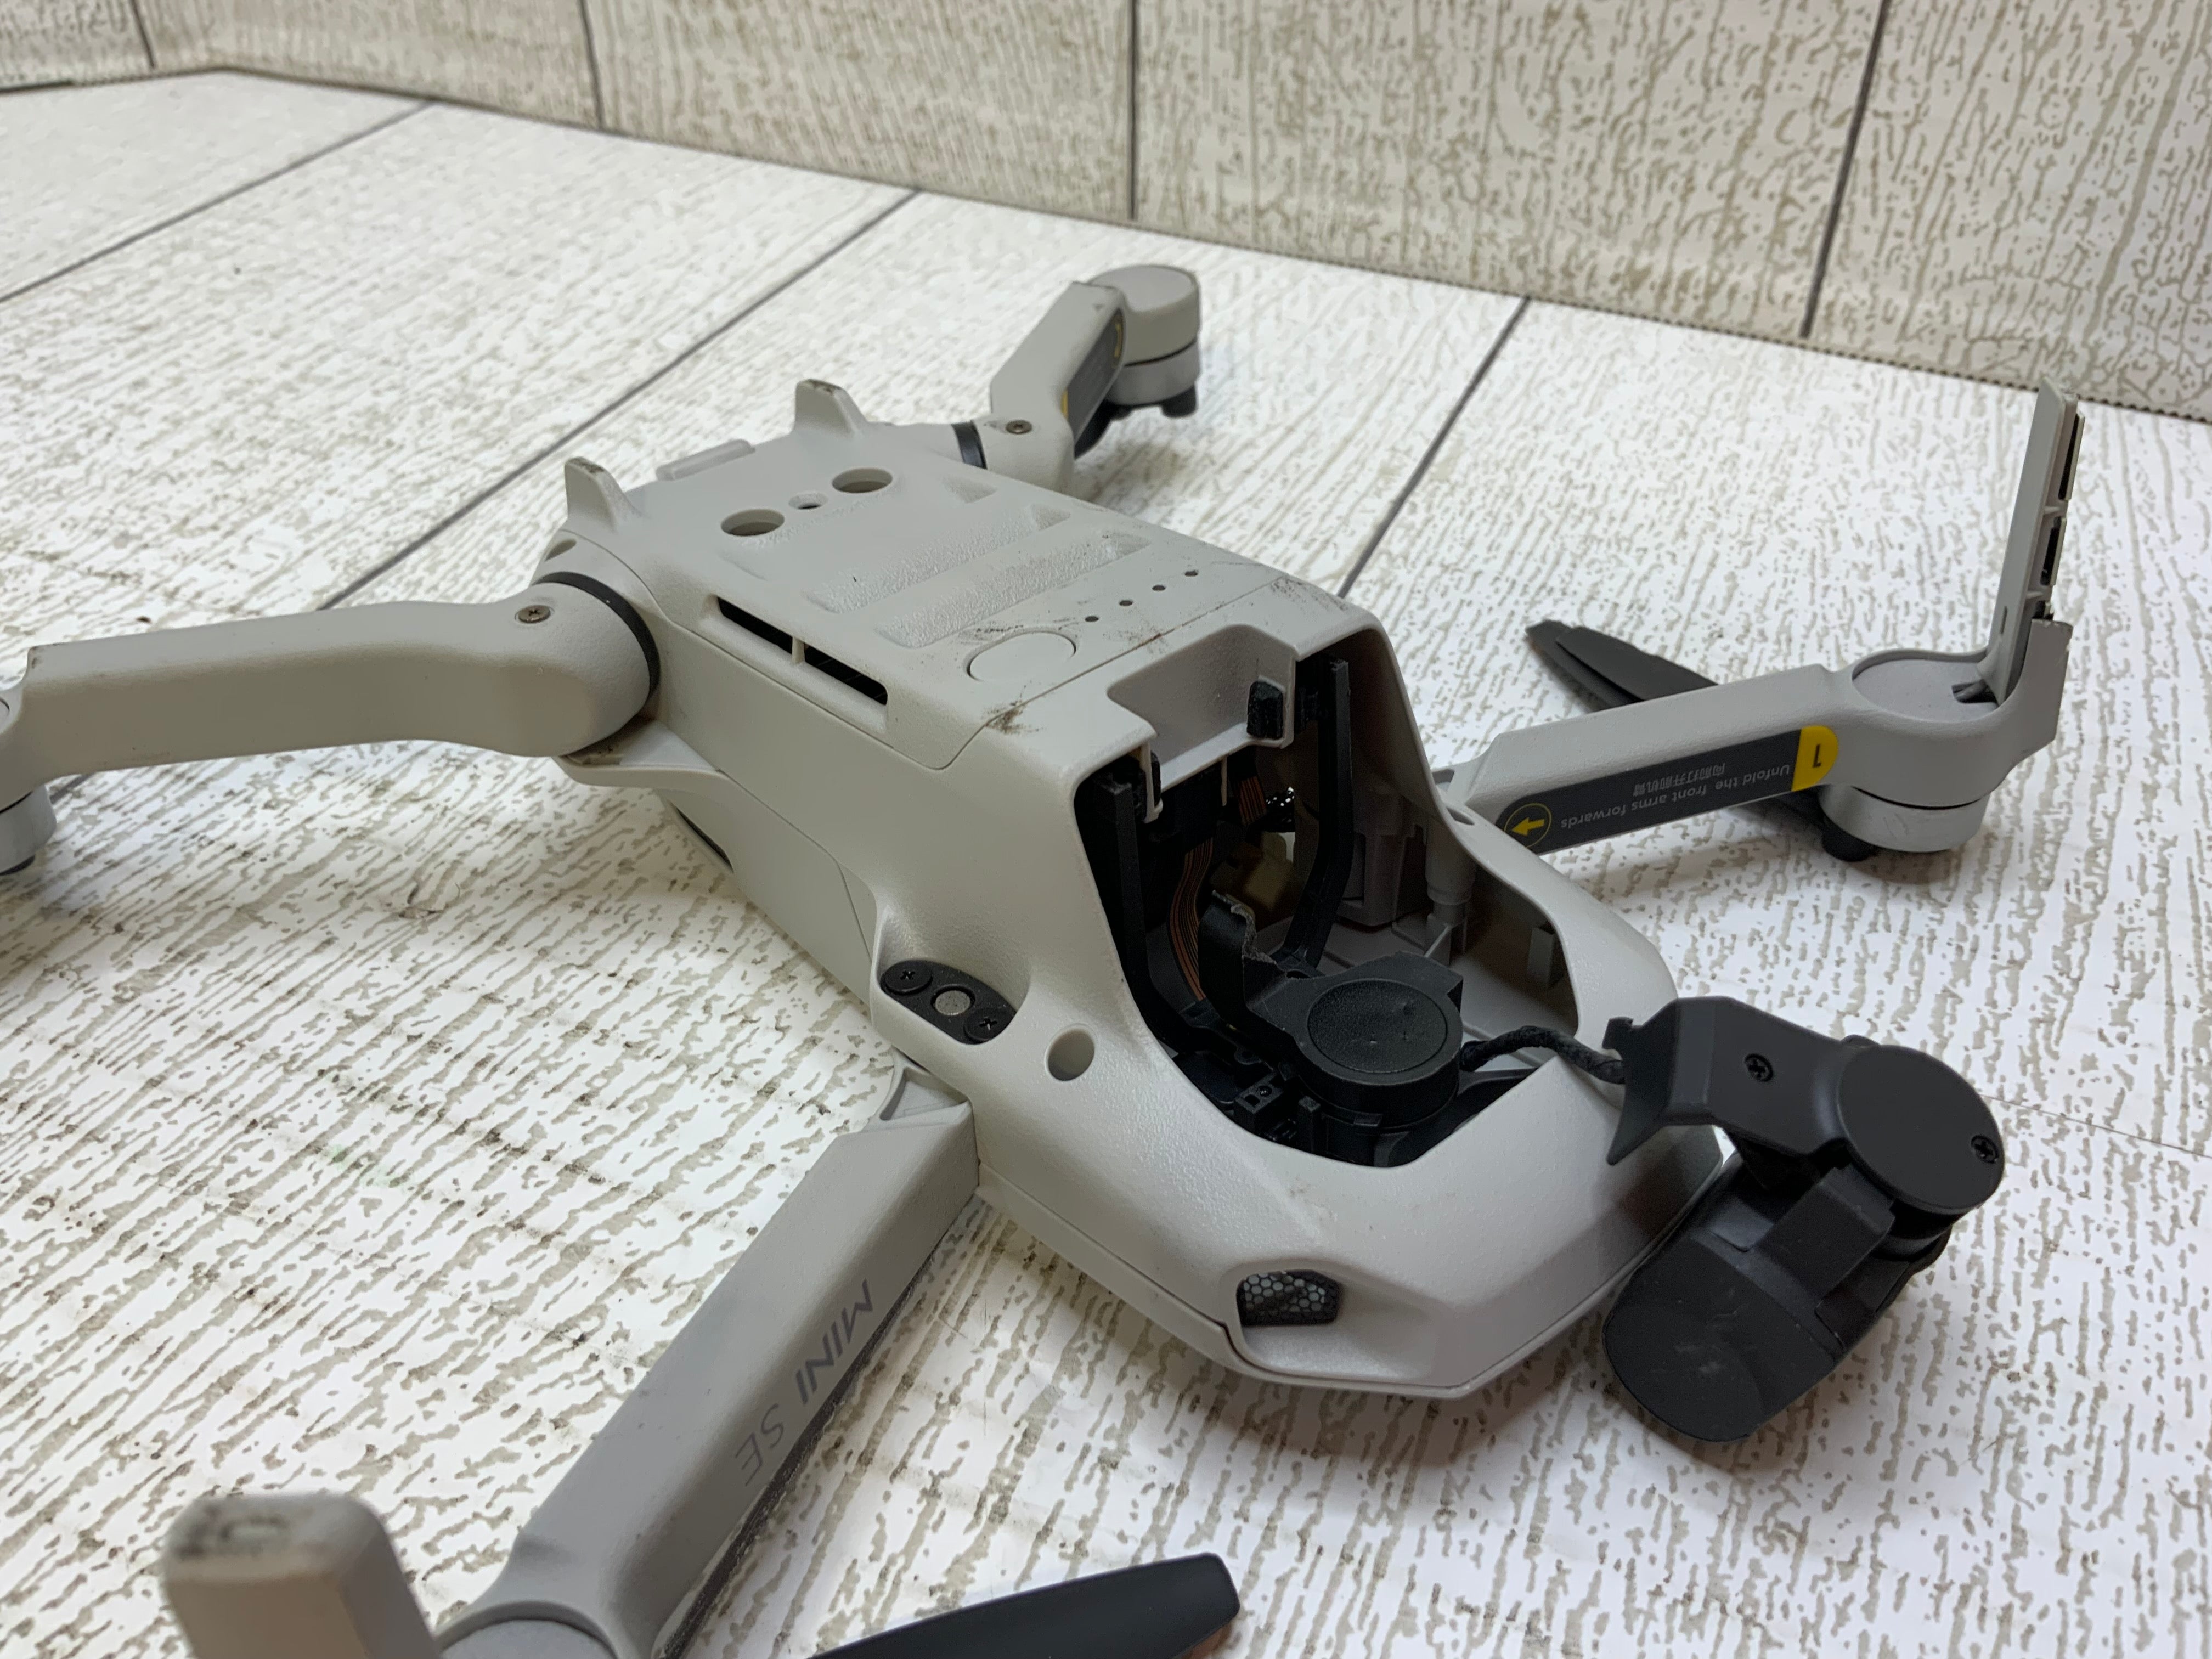 DJI Mini SE - Camera Drone with 3-Axis Gimbal **FOR PARTS/BROKEN** (7957755920622)